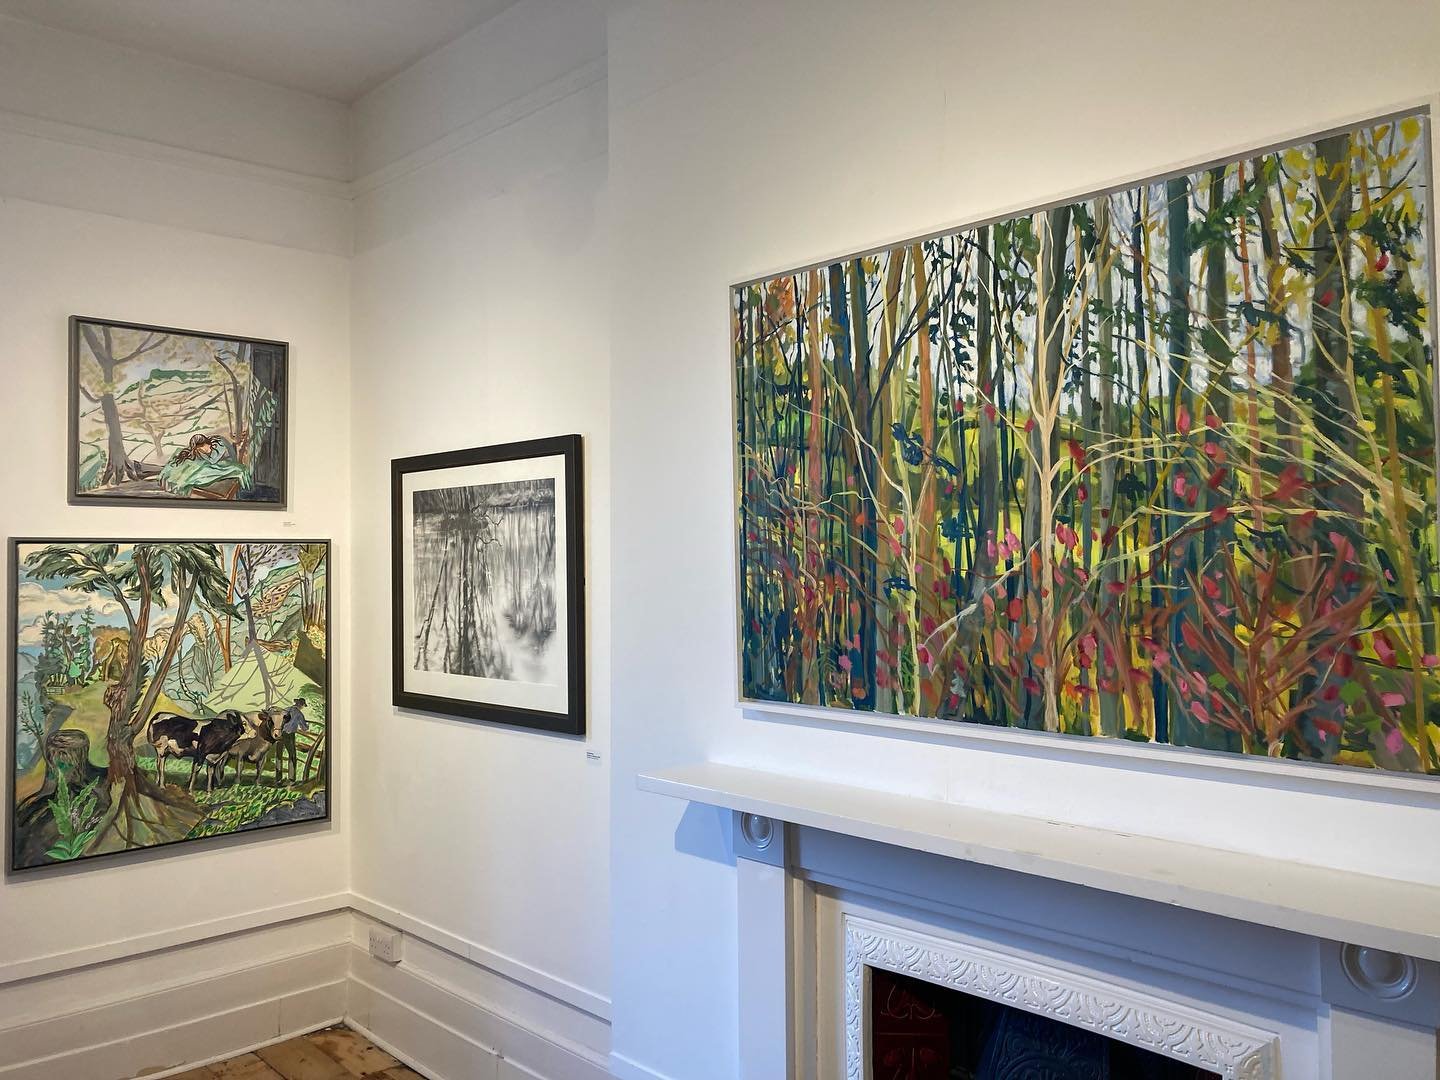 Installation shots from the PV of Paradise Found which opened @thelmahulbertgallery at the weekend and features members of The Arborealists.

Thelma Hulbert Gallery, Honiton, Devon EX14 1LX

18 March to 3 June 2023

A contemporary interpretation by 3